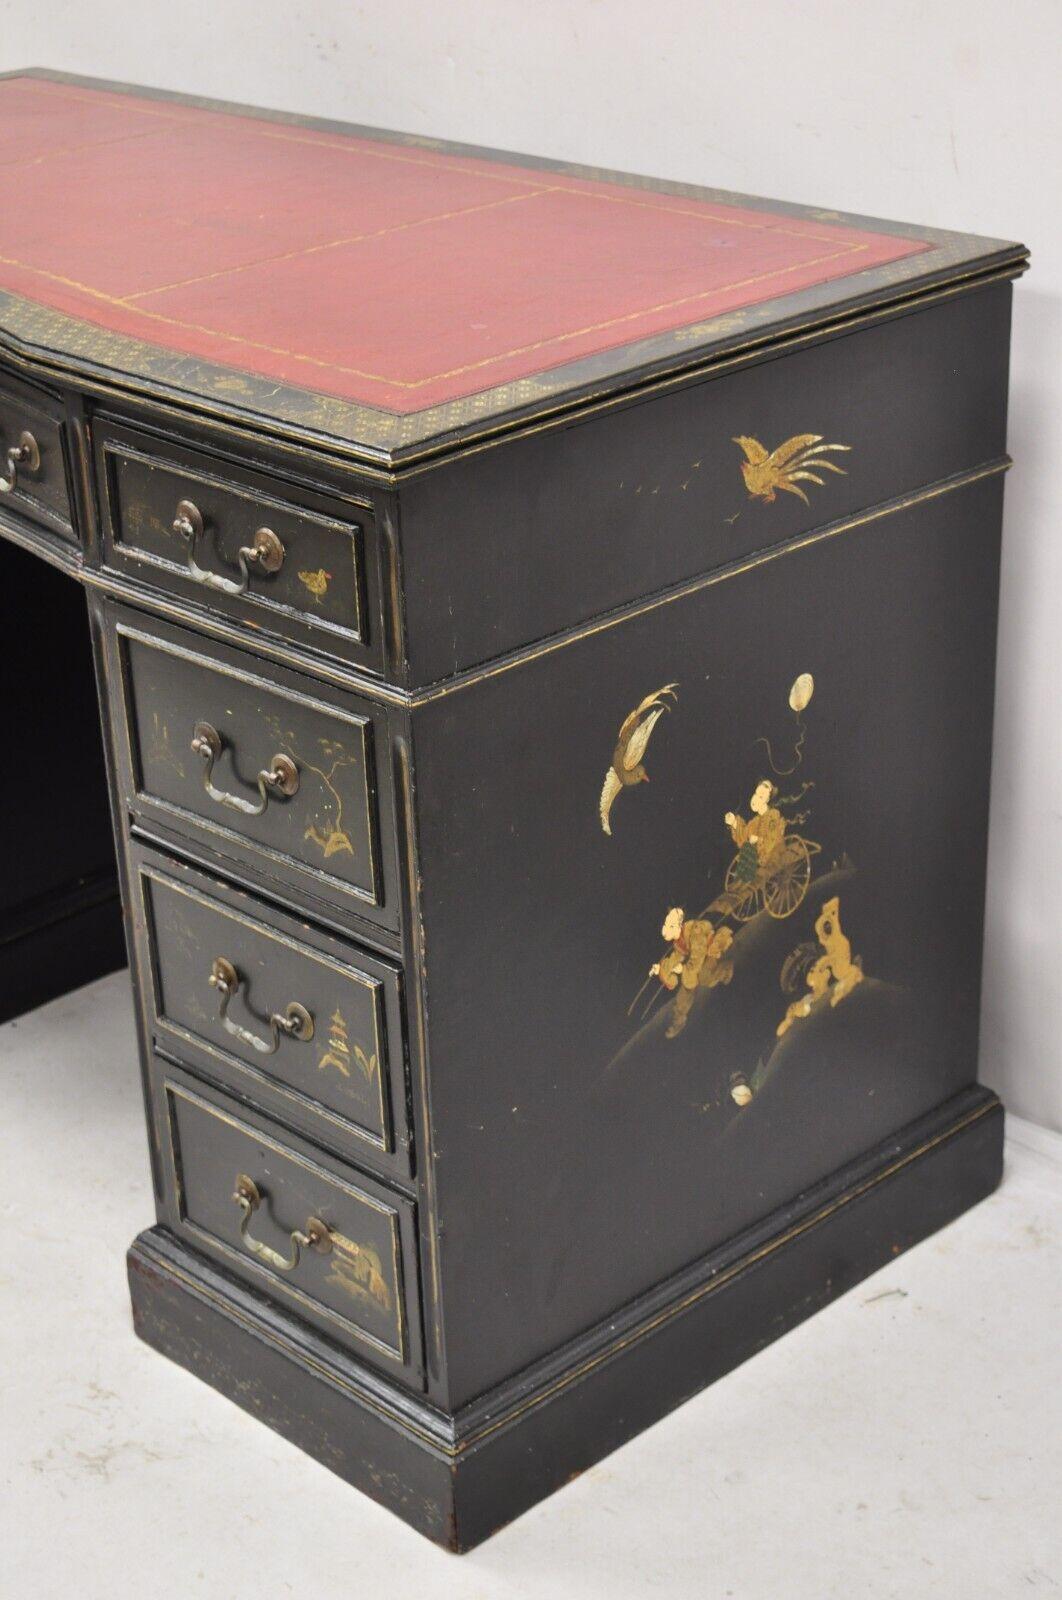 Vintage Chinoiserie Black Chinese Painted Red Leather Top Kneehole Writing Desk In Good Condition For Sale In Philadelphia, PA